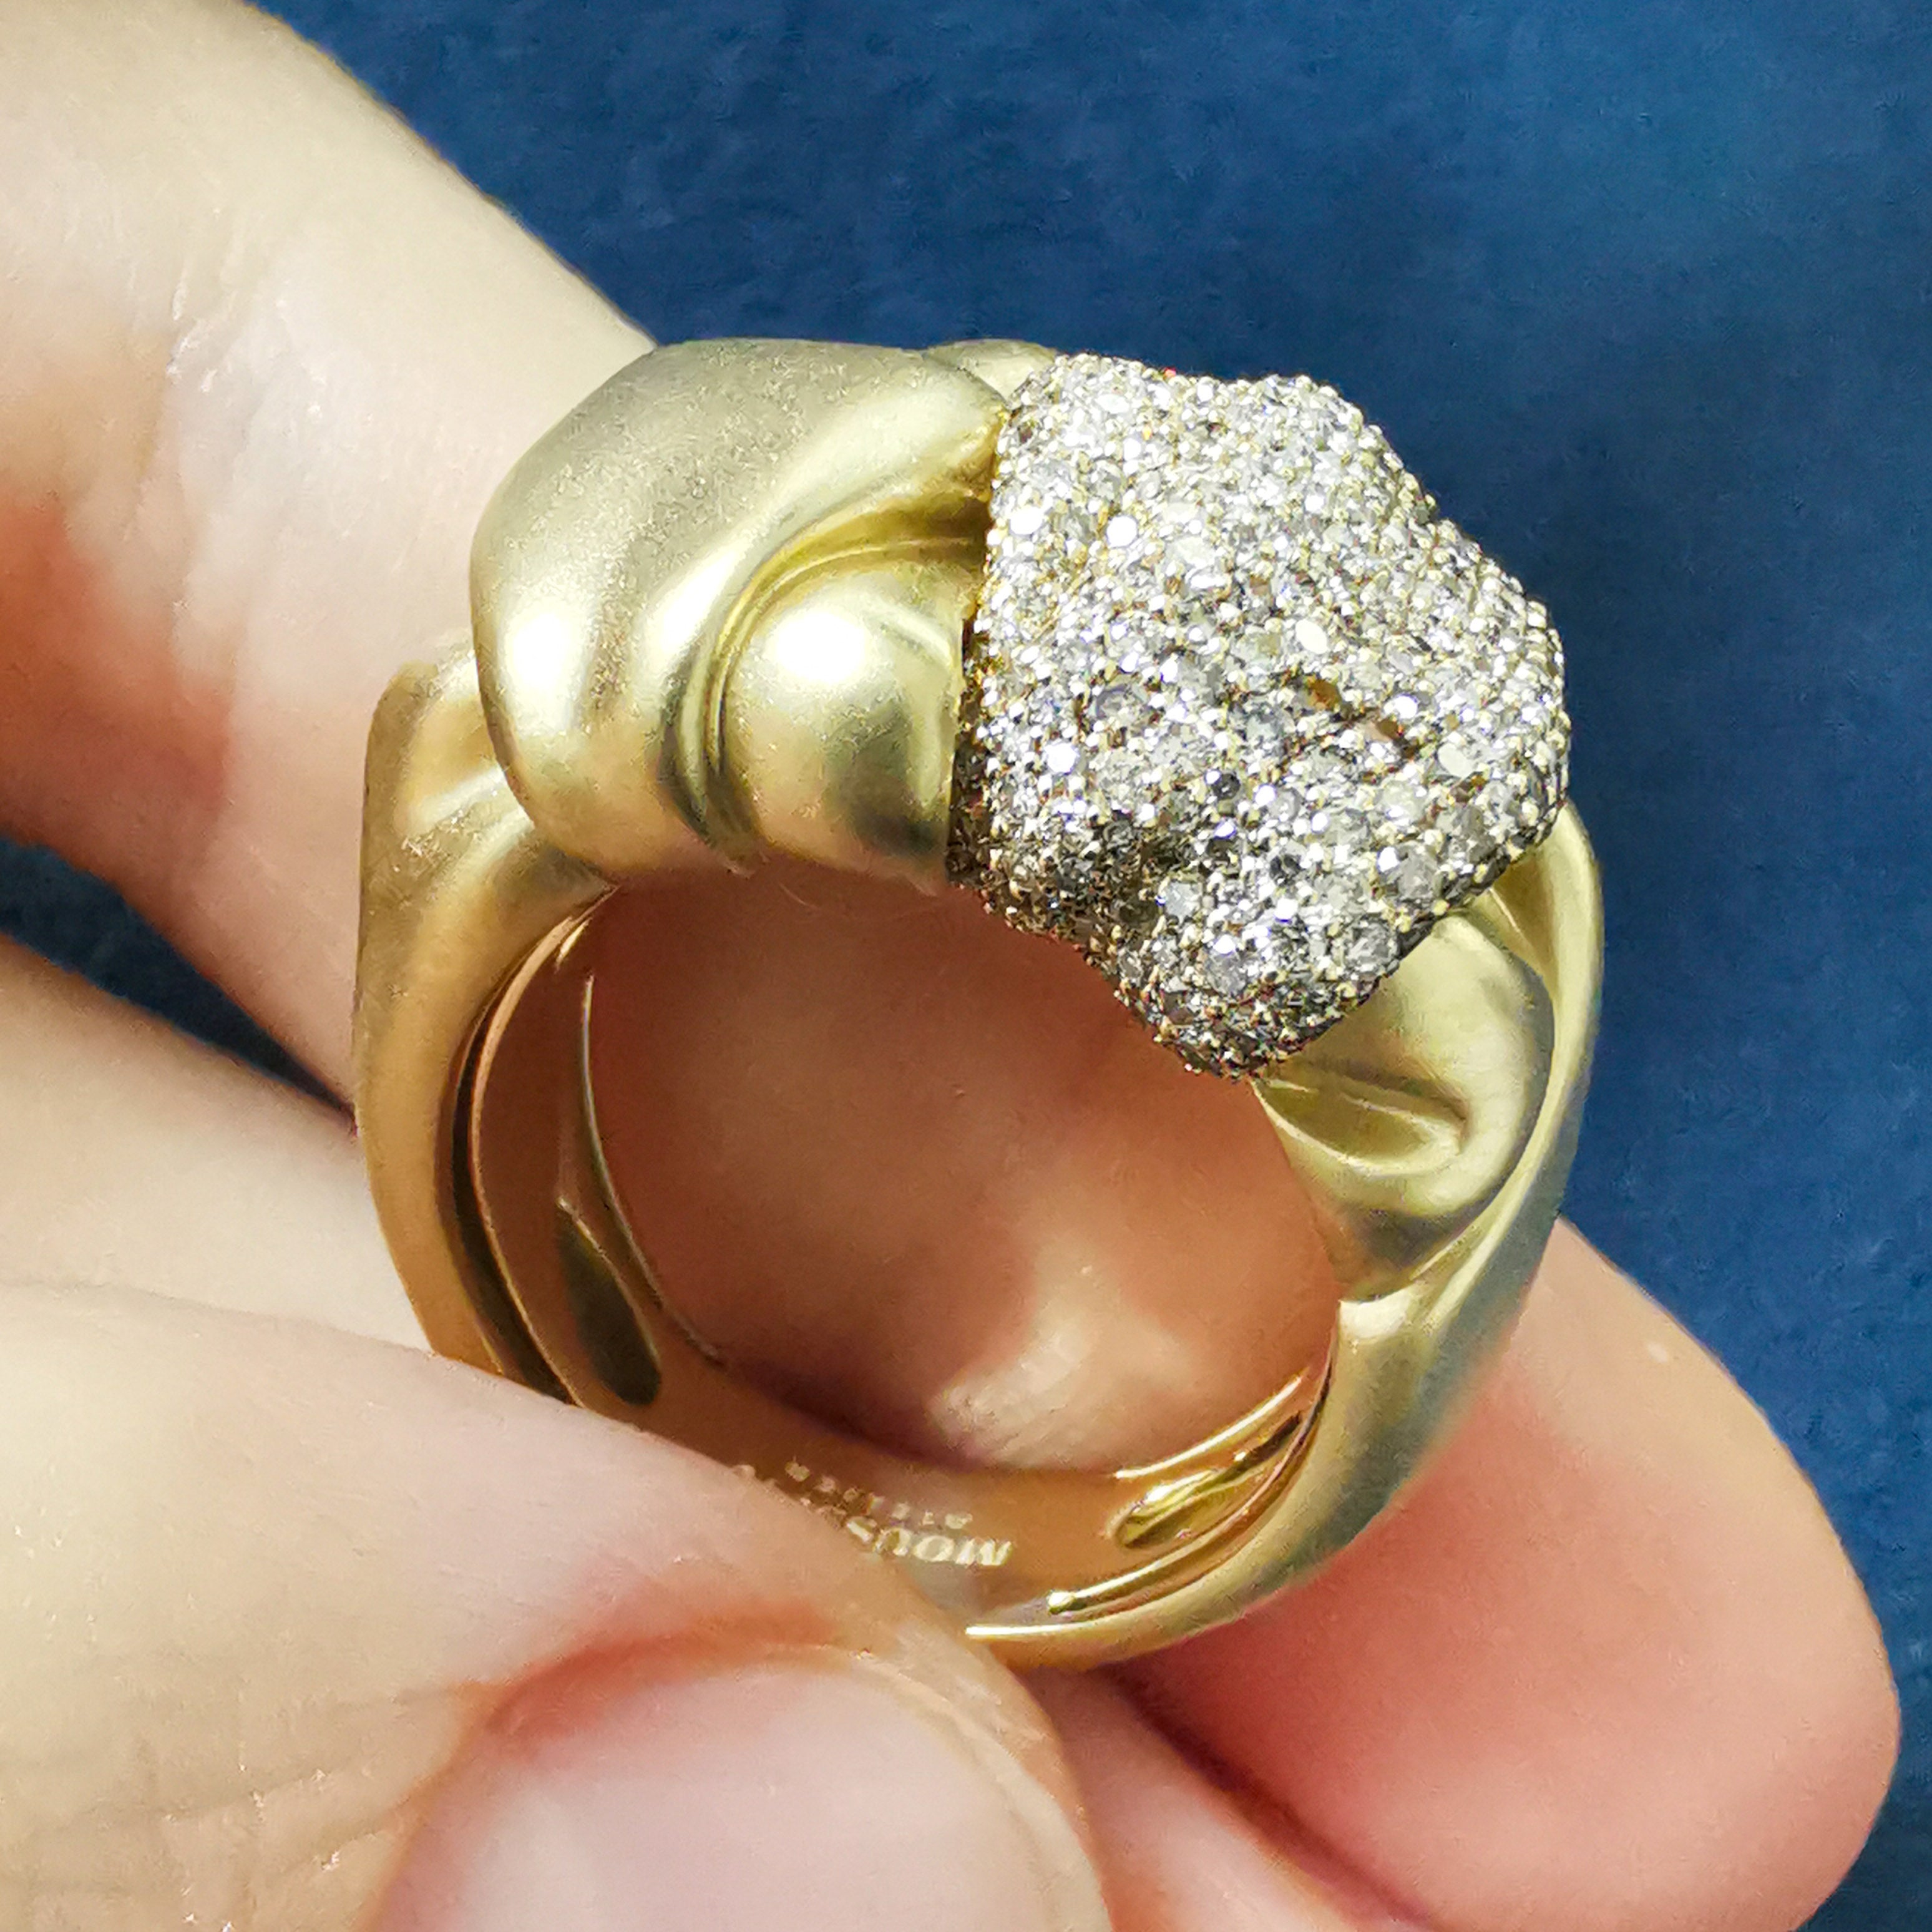 R 0132-2, 18K Yellow Gold, White and Champagne Diamonds Small Ring